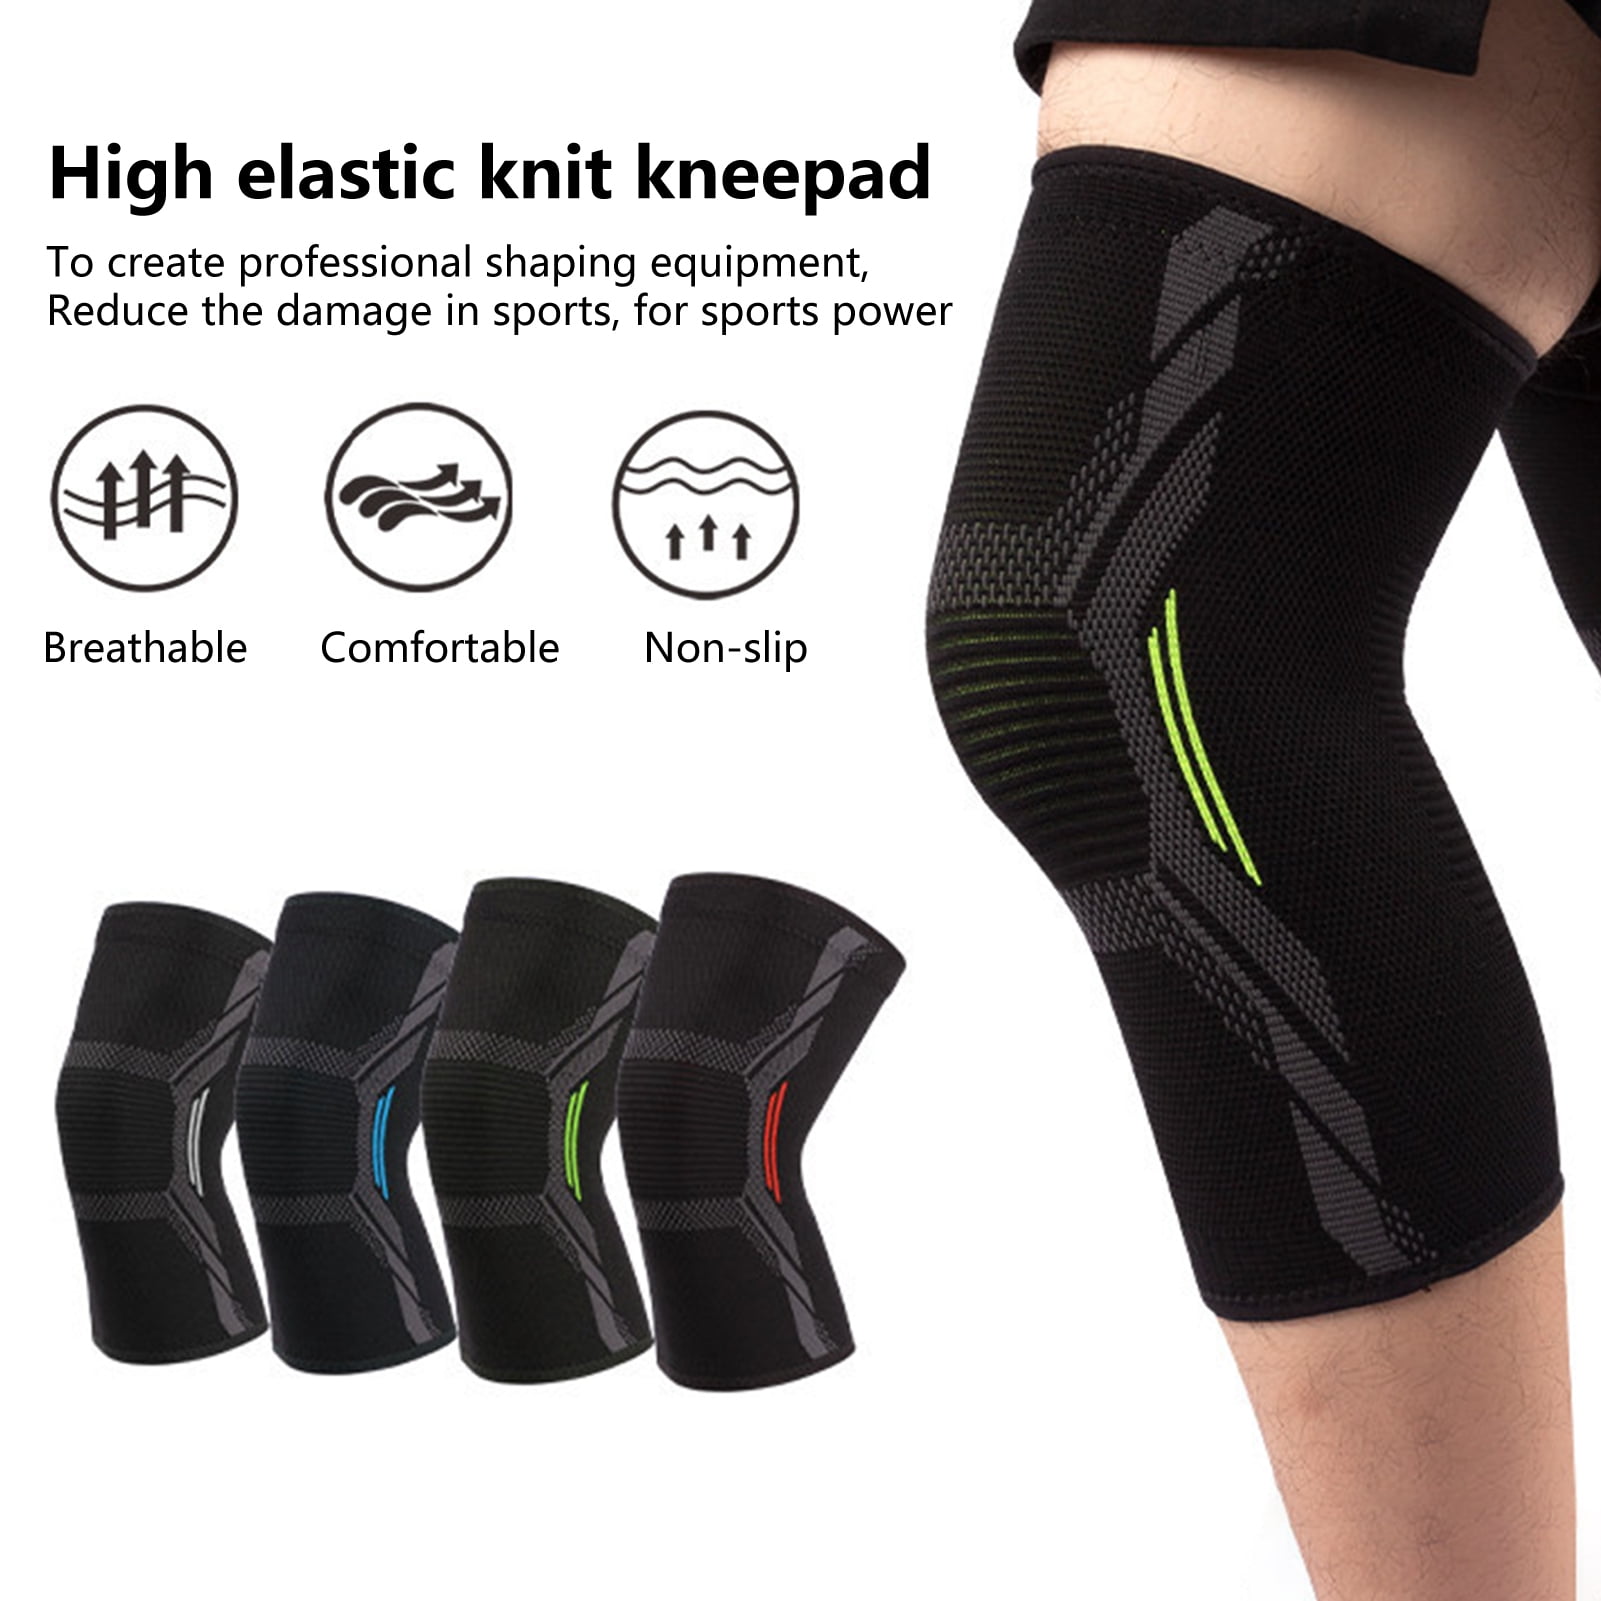 Pain Relief Warming Knee Thermal Cashmere Knee Leg Warmer Brace Thicken Elastic Knee Supports Breathable Cozy Knee Protector Guard Winter Warm Knee Sleeves Legging Stockings for Arthritis Exercise 